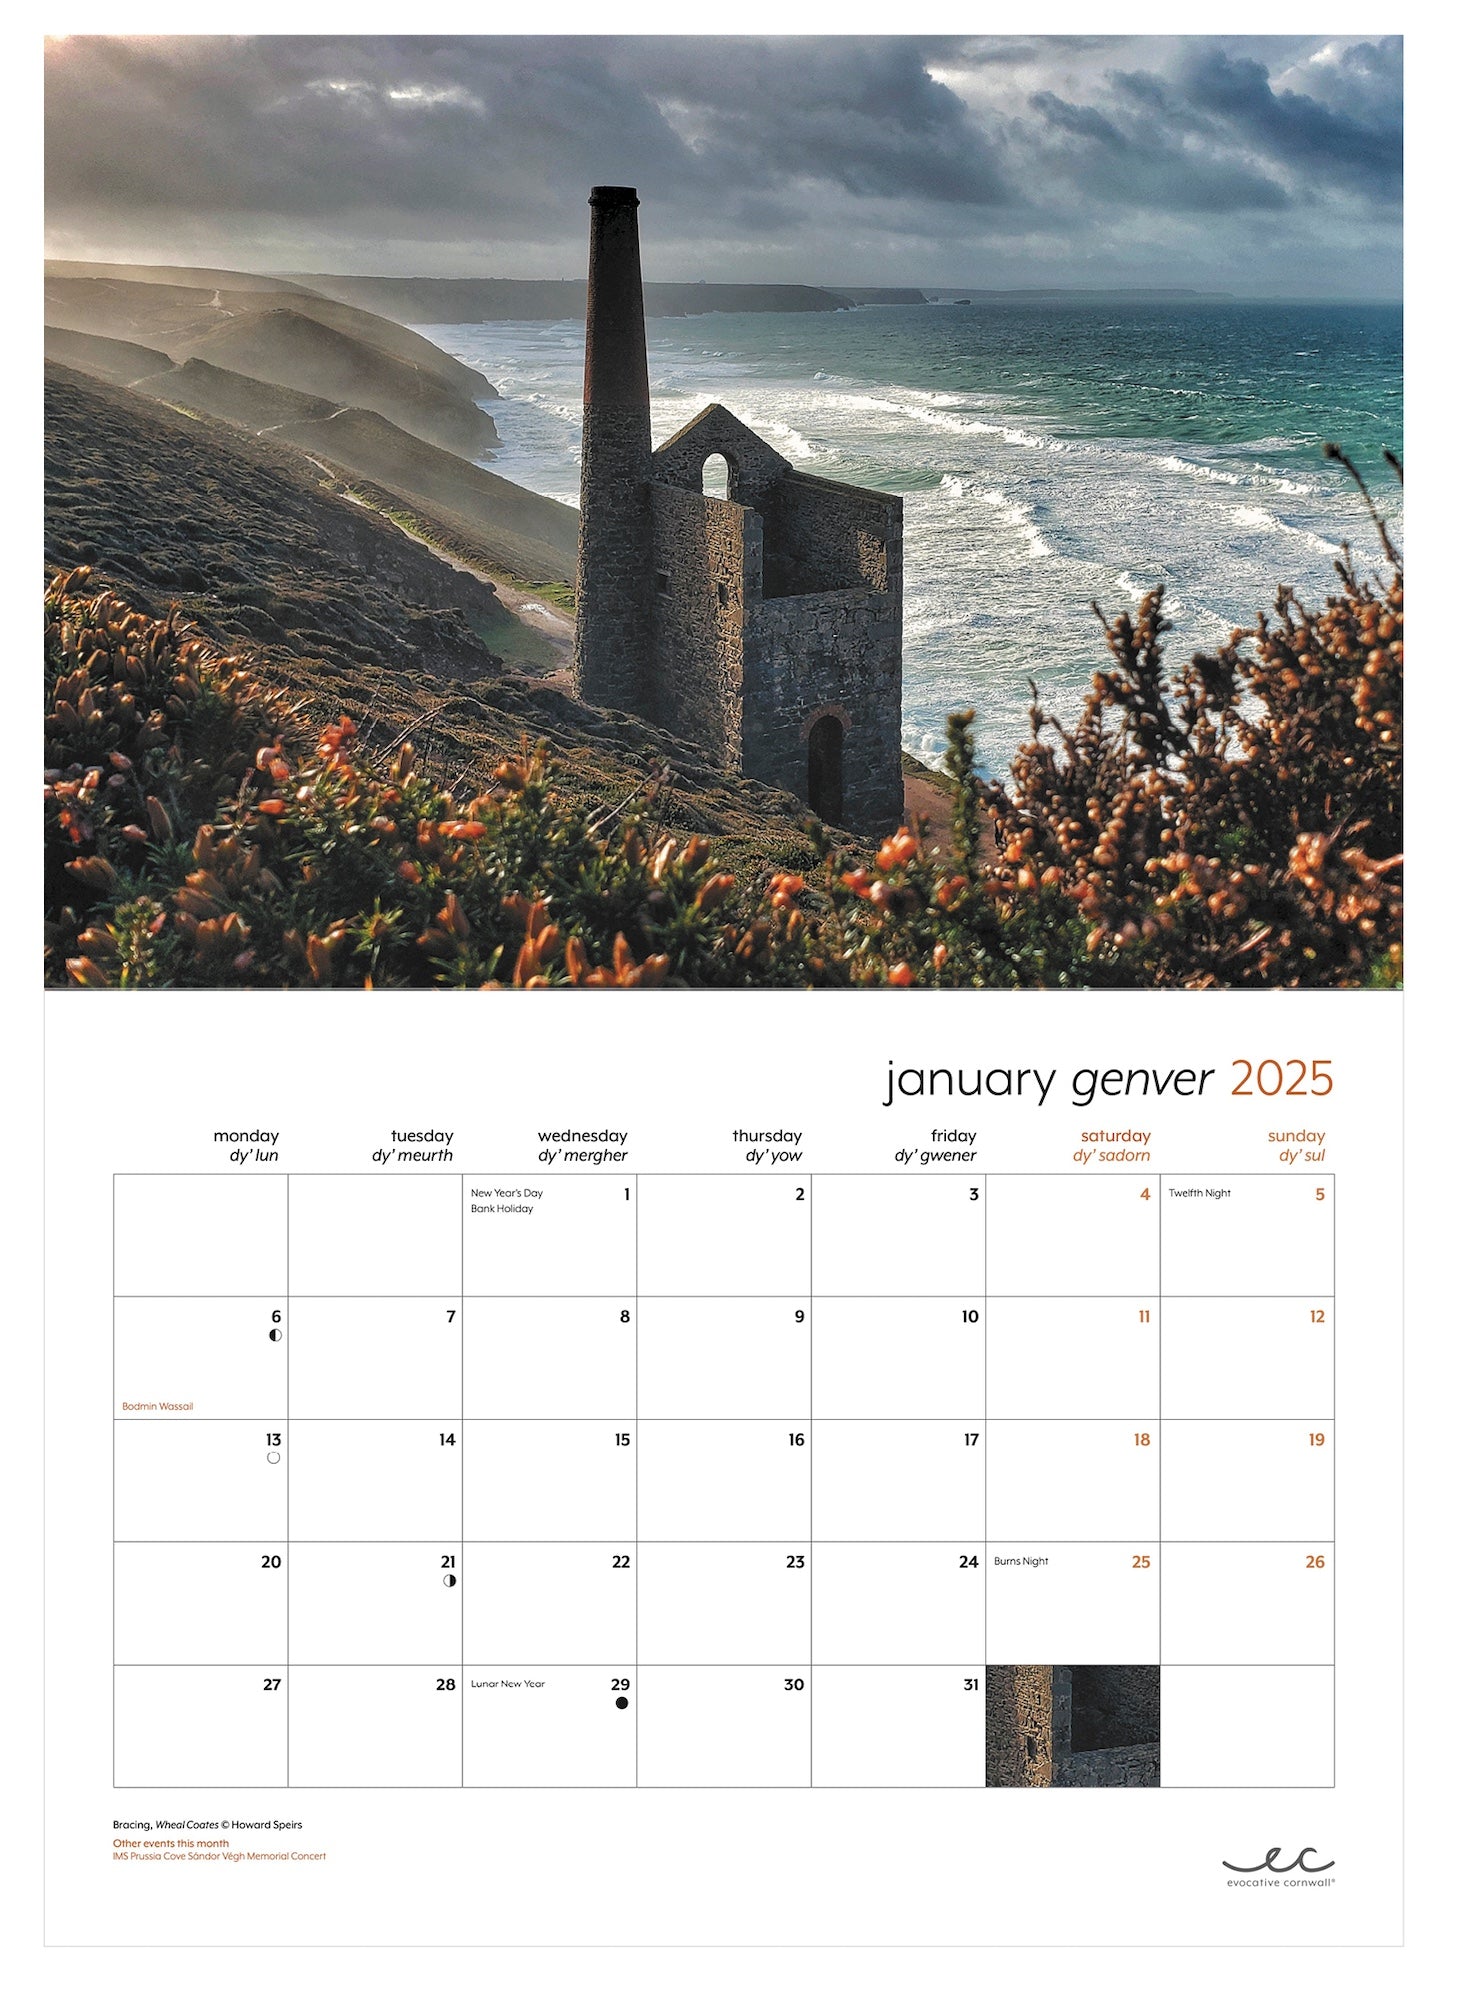 Cornwall calendar 2025 inside pages